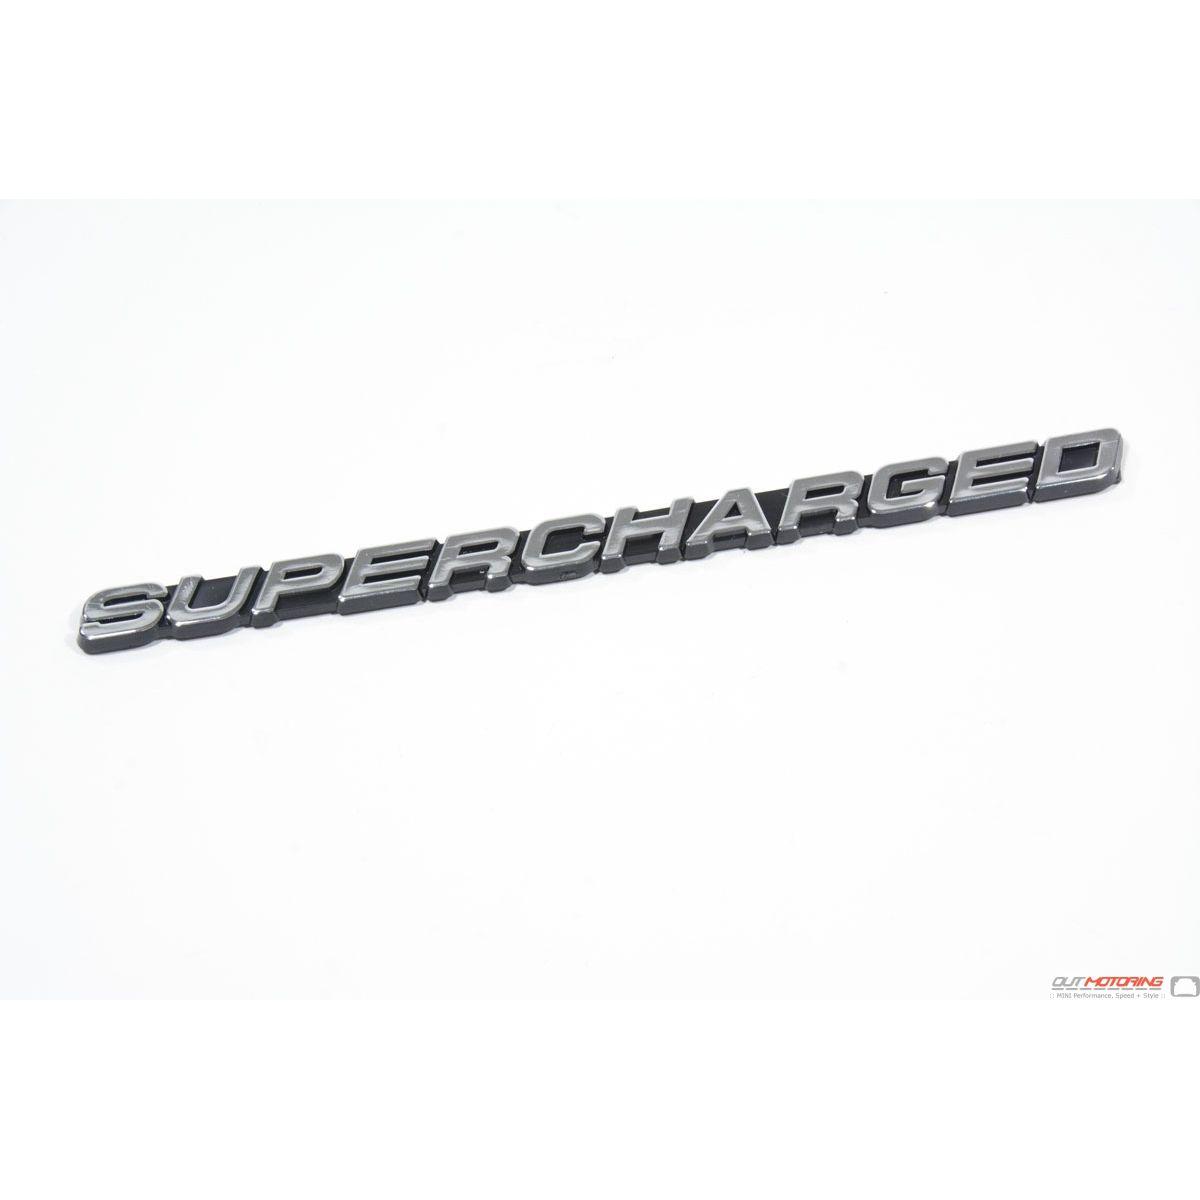 Supercharged Logo - MINI Cooper SUPERCHARGED Badge: 5.5 Cooper Accessories +